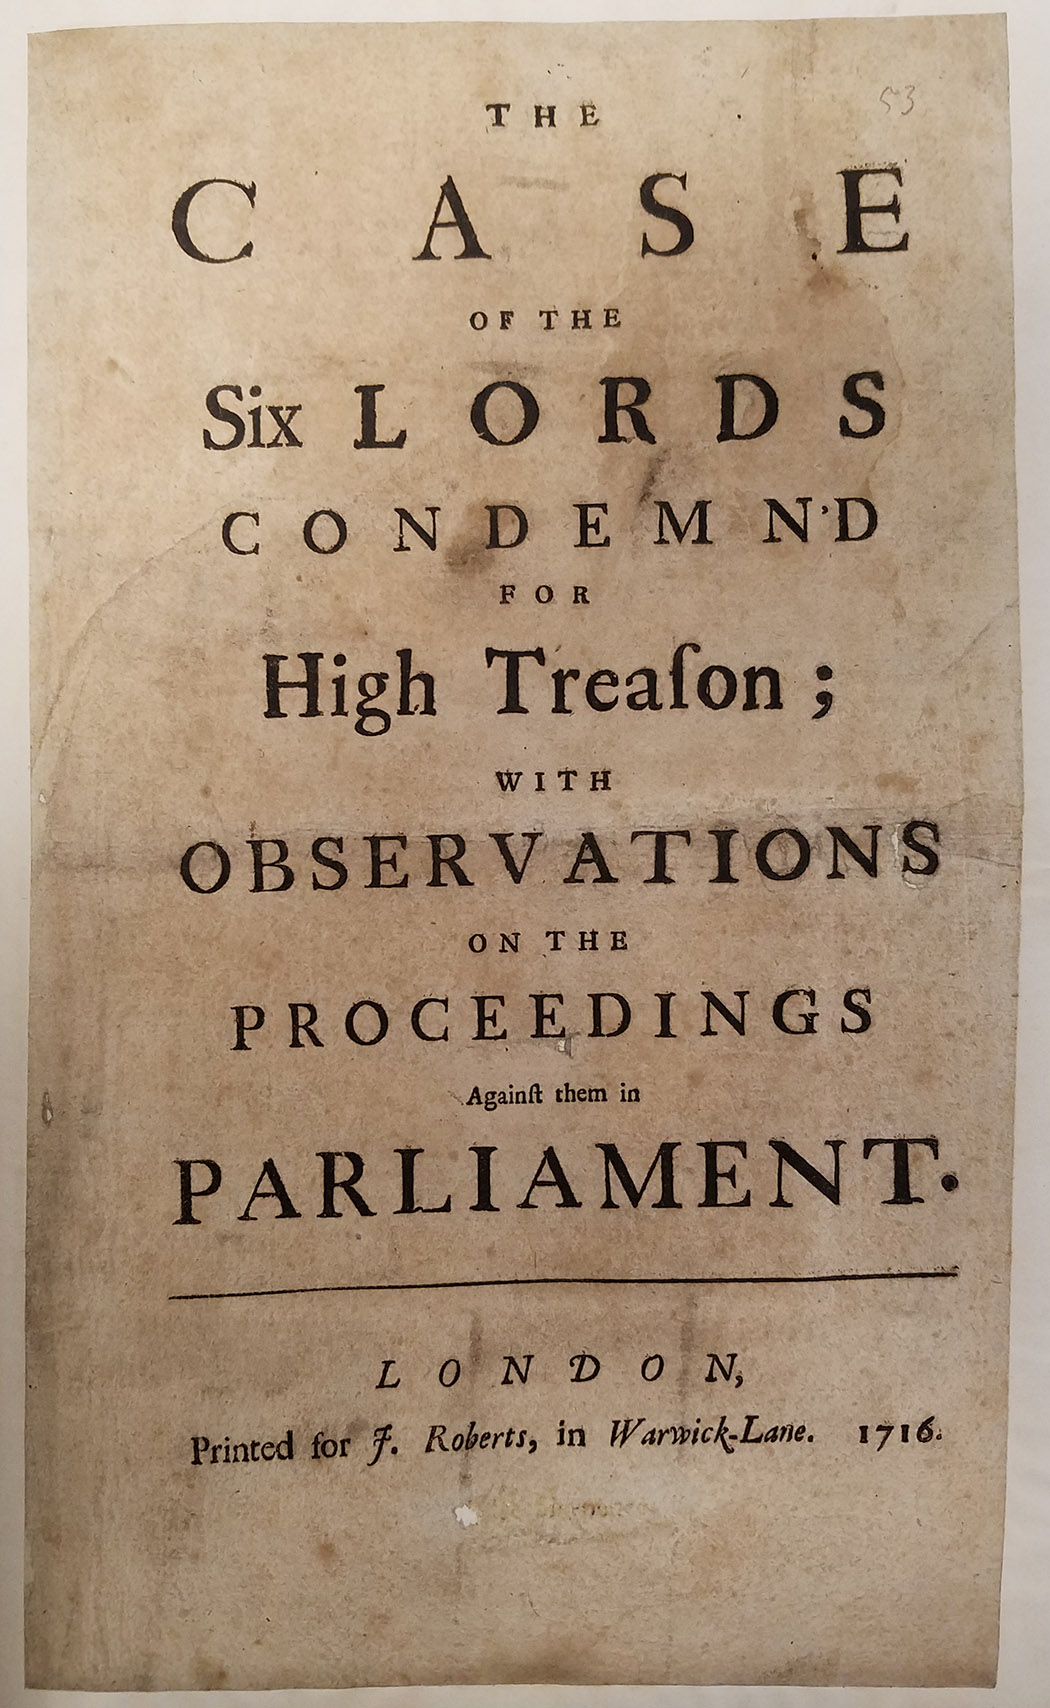 Depiction of The case of the six lords condemned for high treason